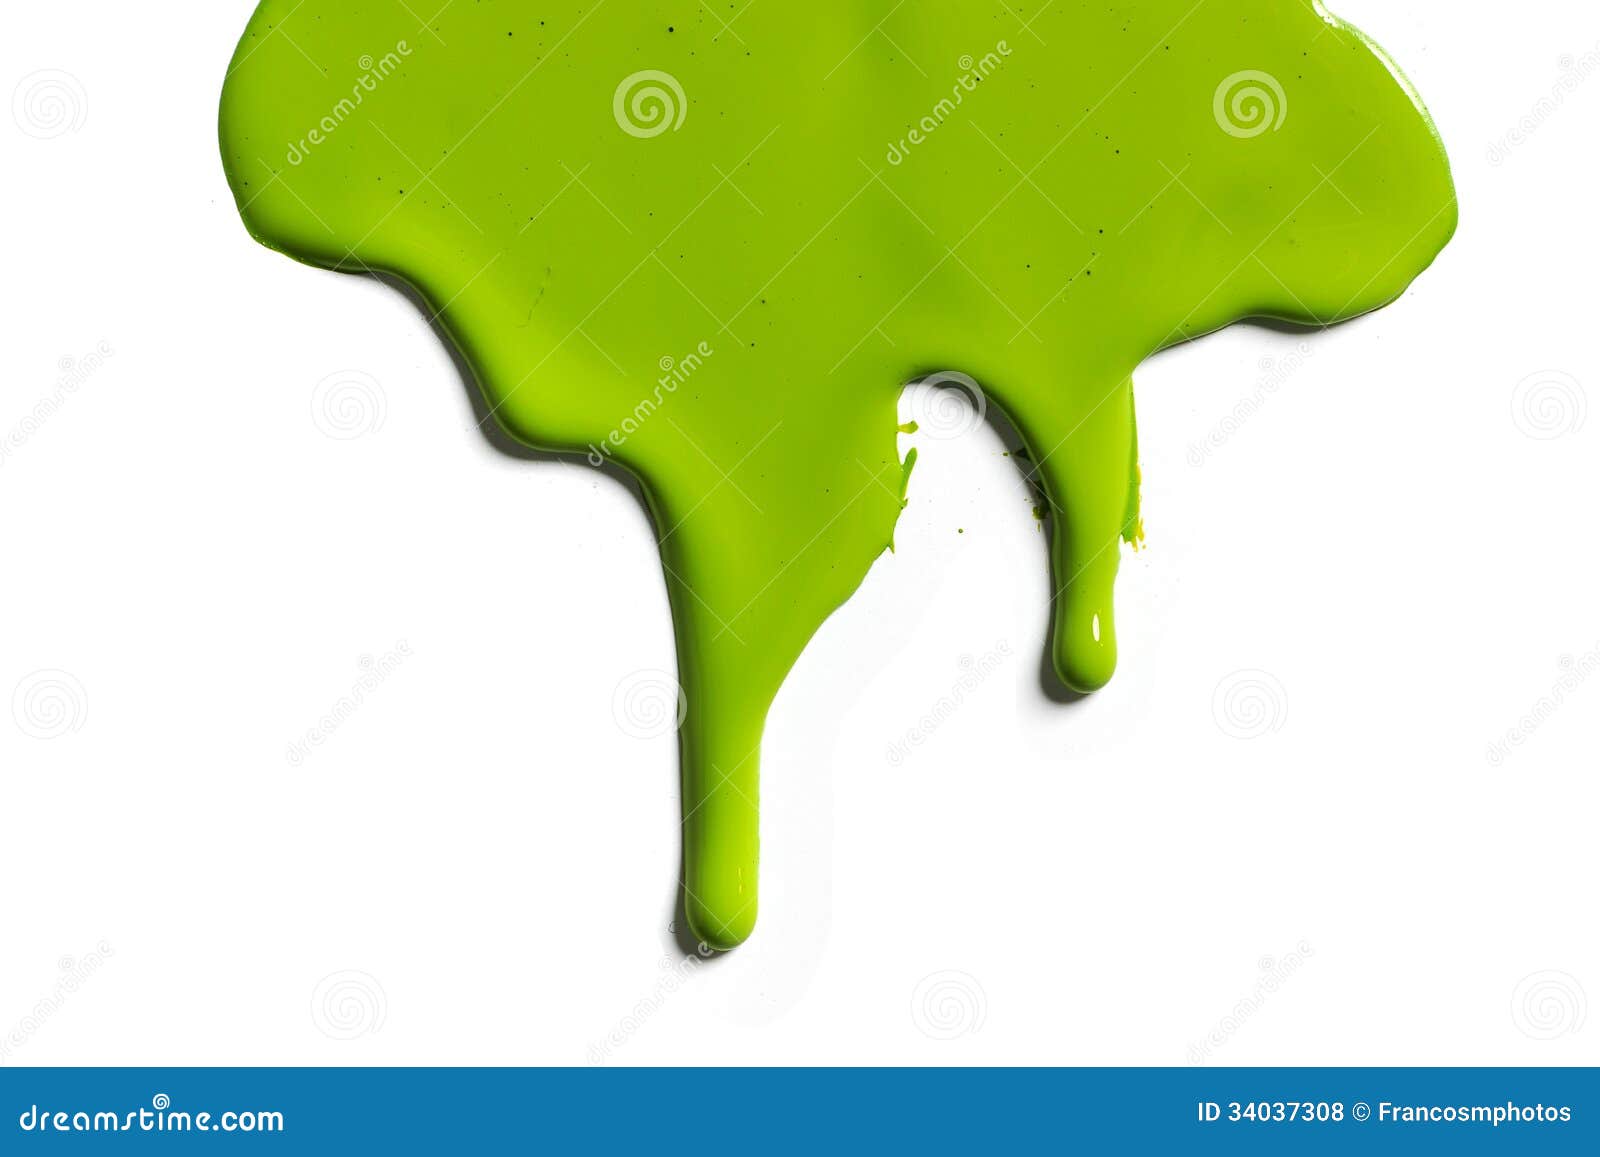 Green Spilled Paint Stock Photo, Picture and Royalty Free Image